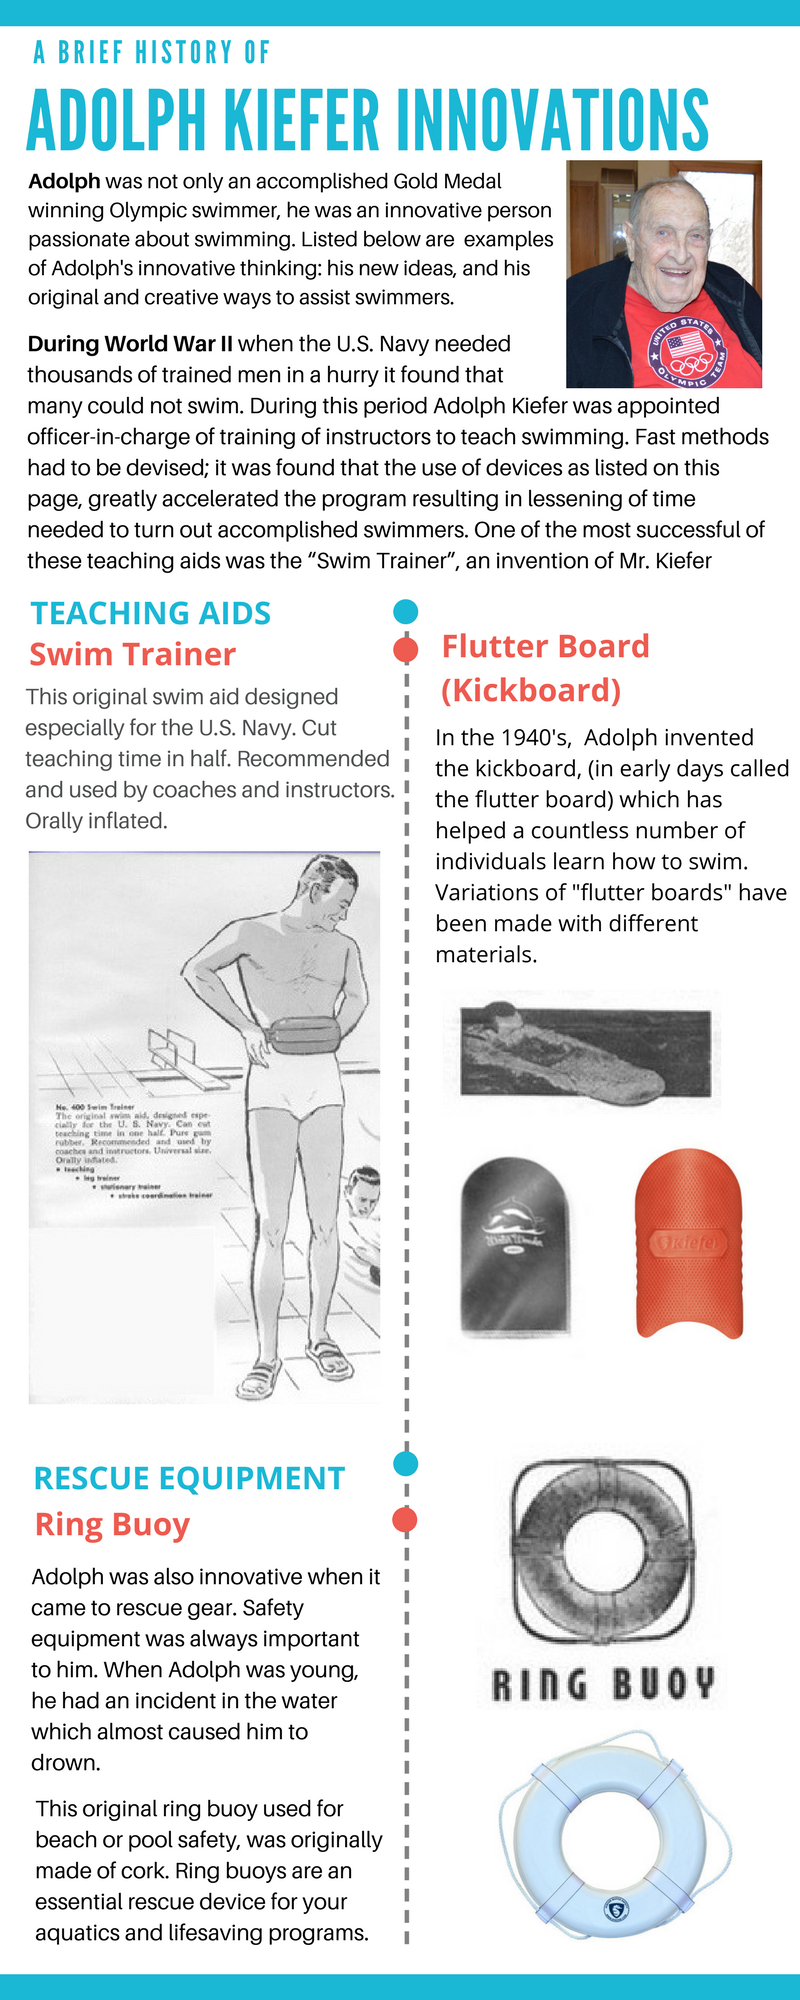 Adolph Kiefer Innovations Infographic